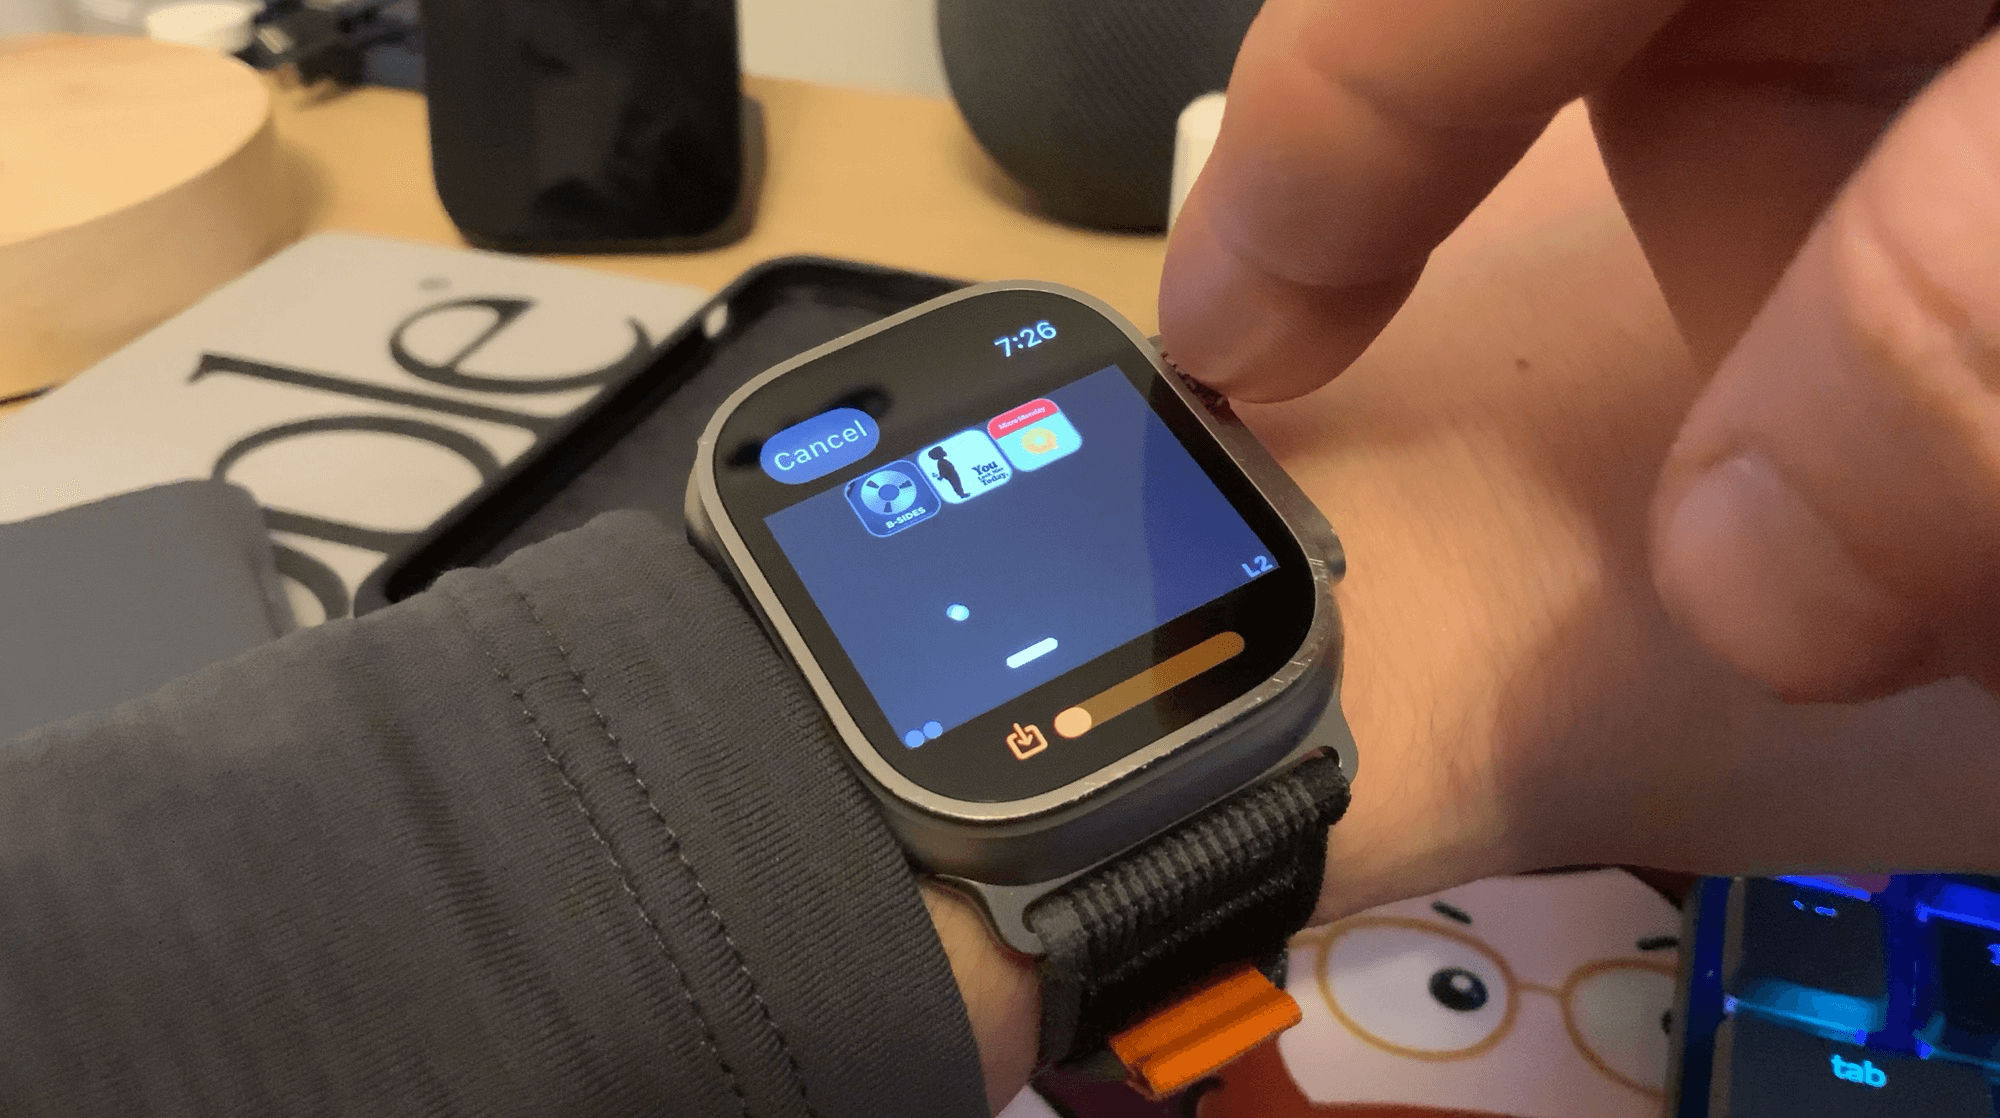 A smartwatch on a wrist displays a game of Breakout with podcast artwork as the tiles; a finger prepares to tap the screen. A blurred office environment with various items forms the background.